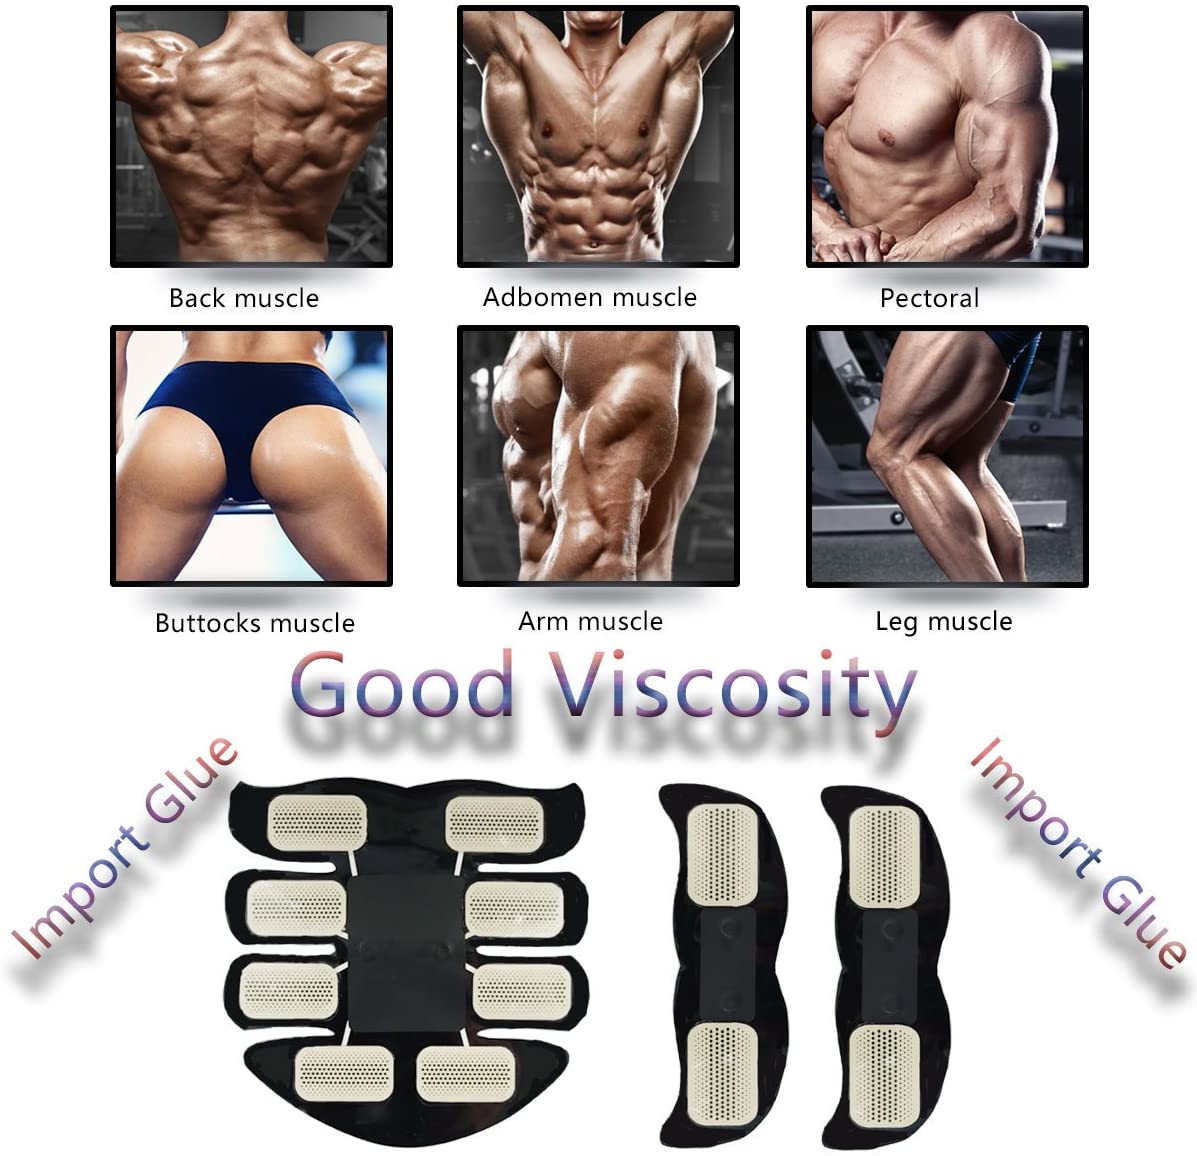 Amerteer Abs Stimulator,Muscle Toner,Ab Muscle Stimulator Belt,Abdominal Toner Training Device for Muscles,Wireless Ab Machine Workout Equipment Portable for Men & Women - image 3 of 8